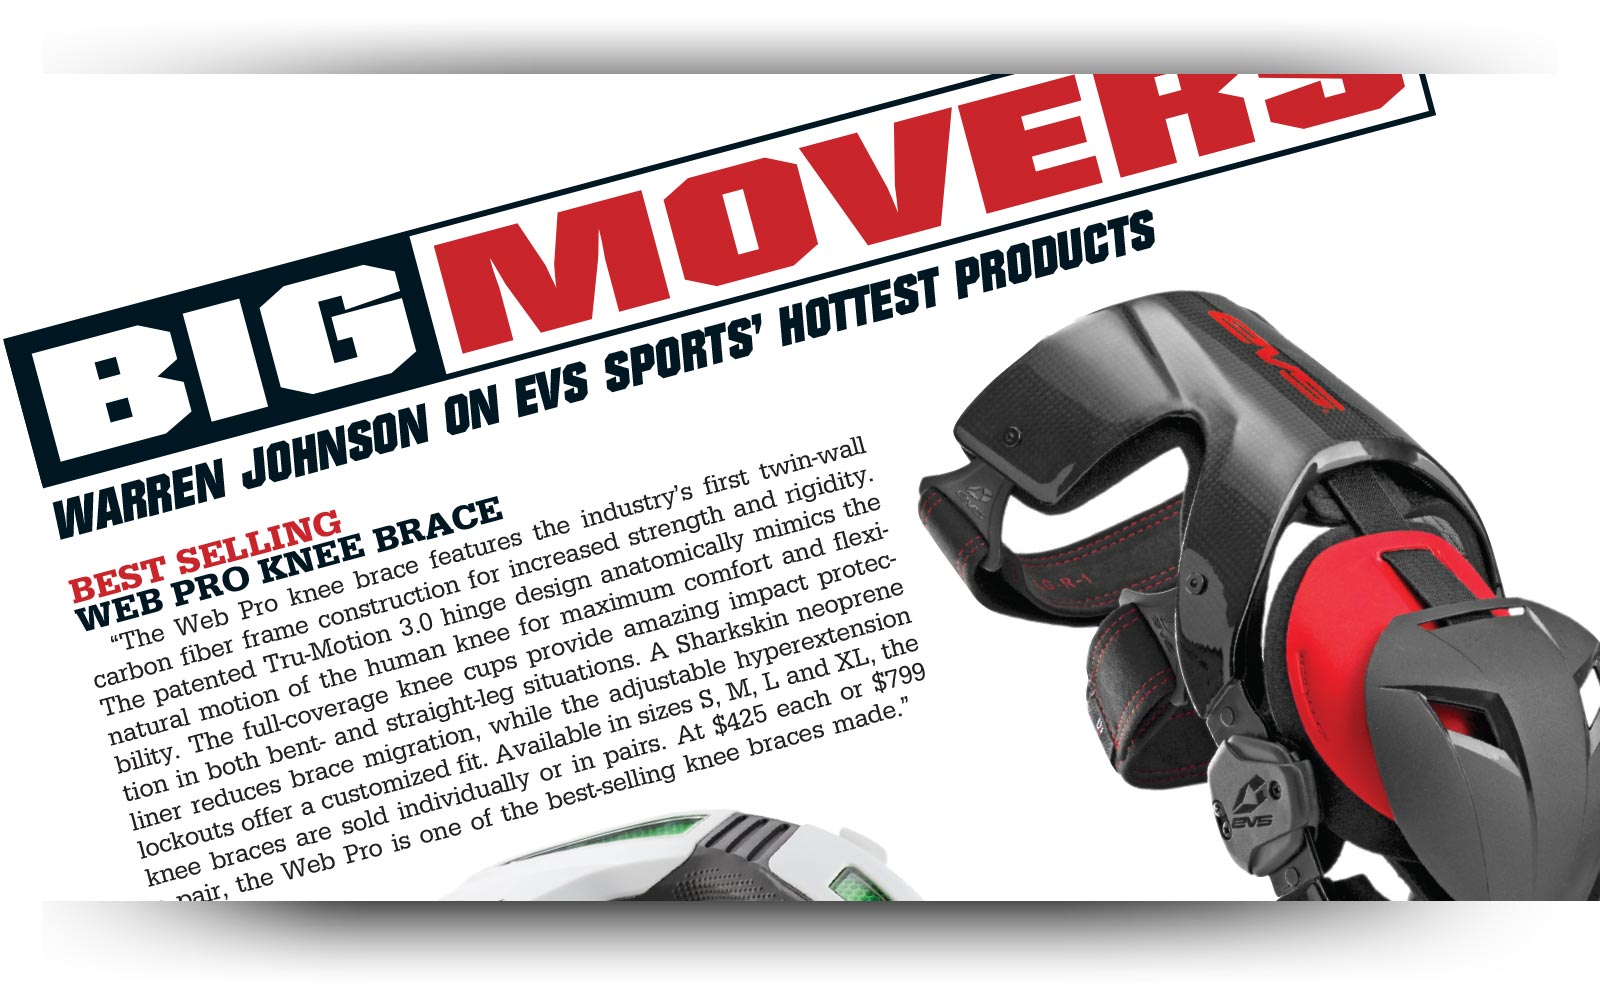 Motocross Action Magazine - EVS Sports are Big Movers